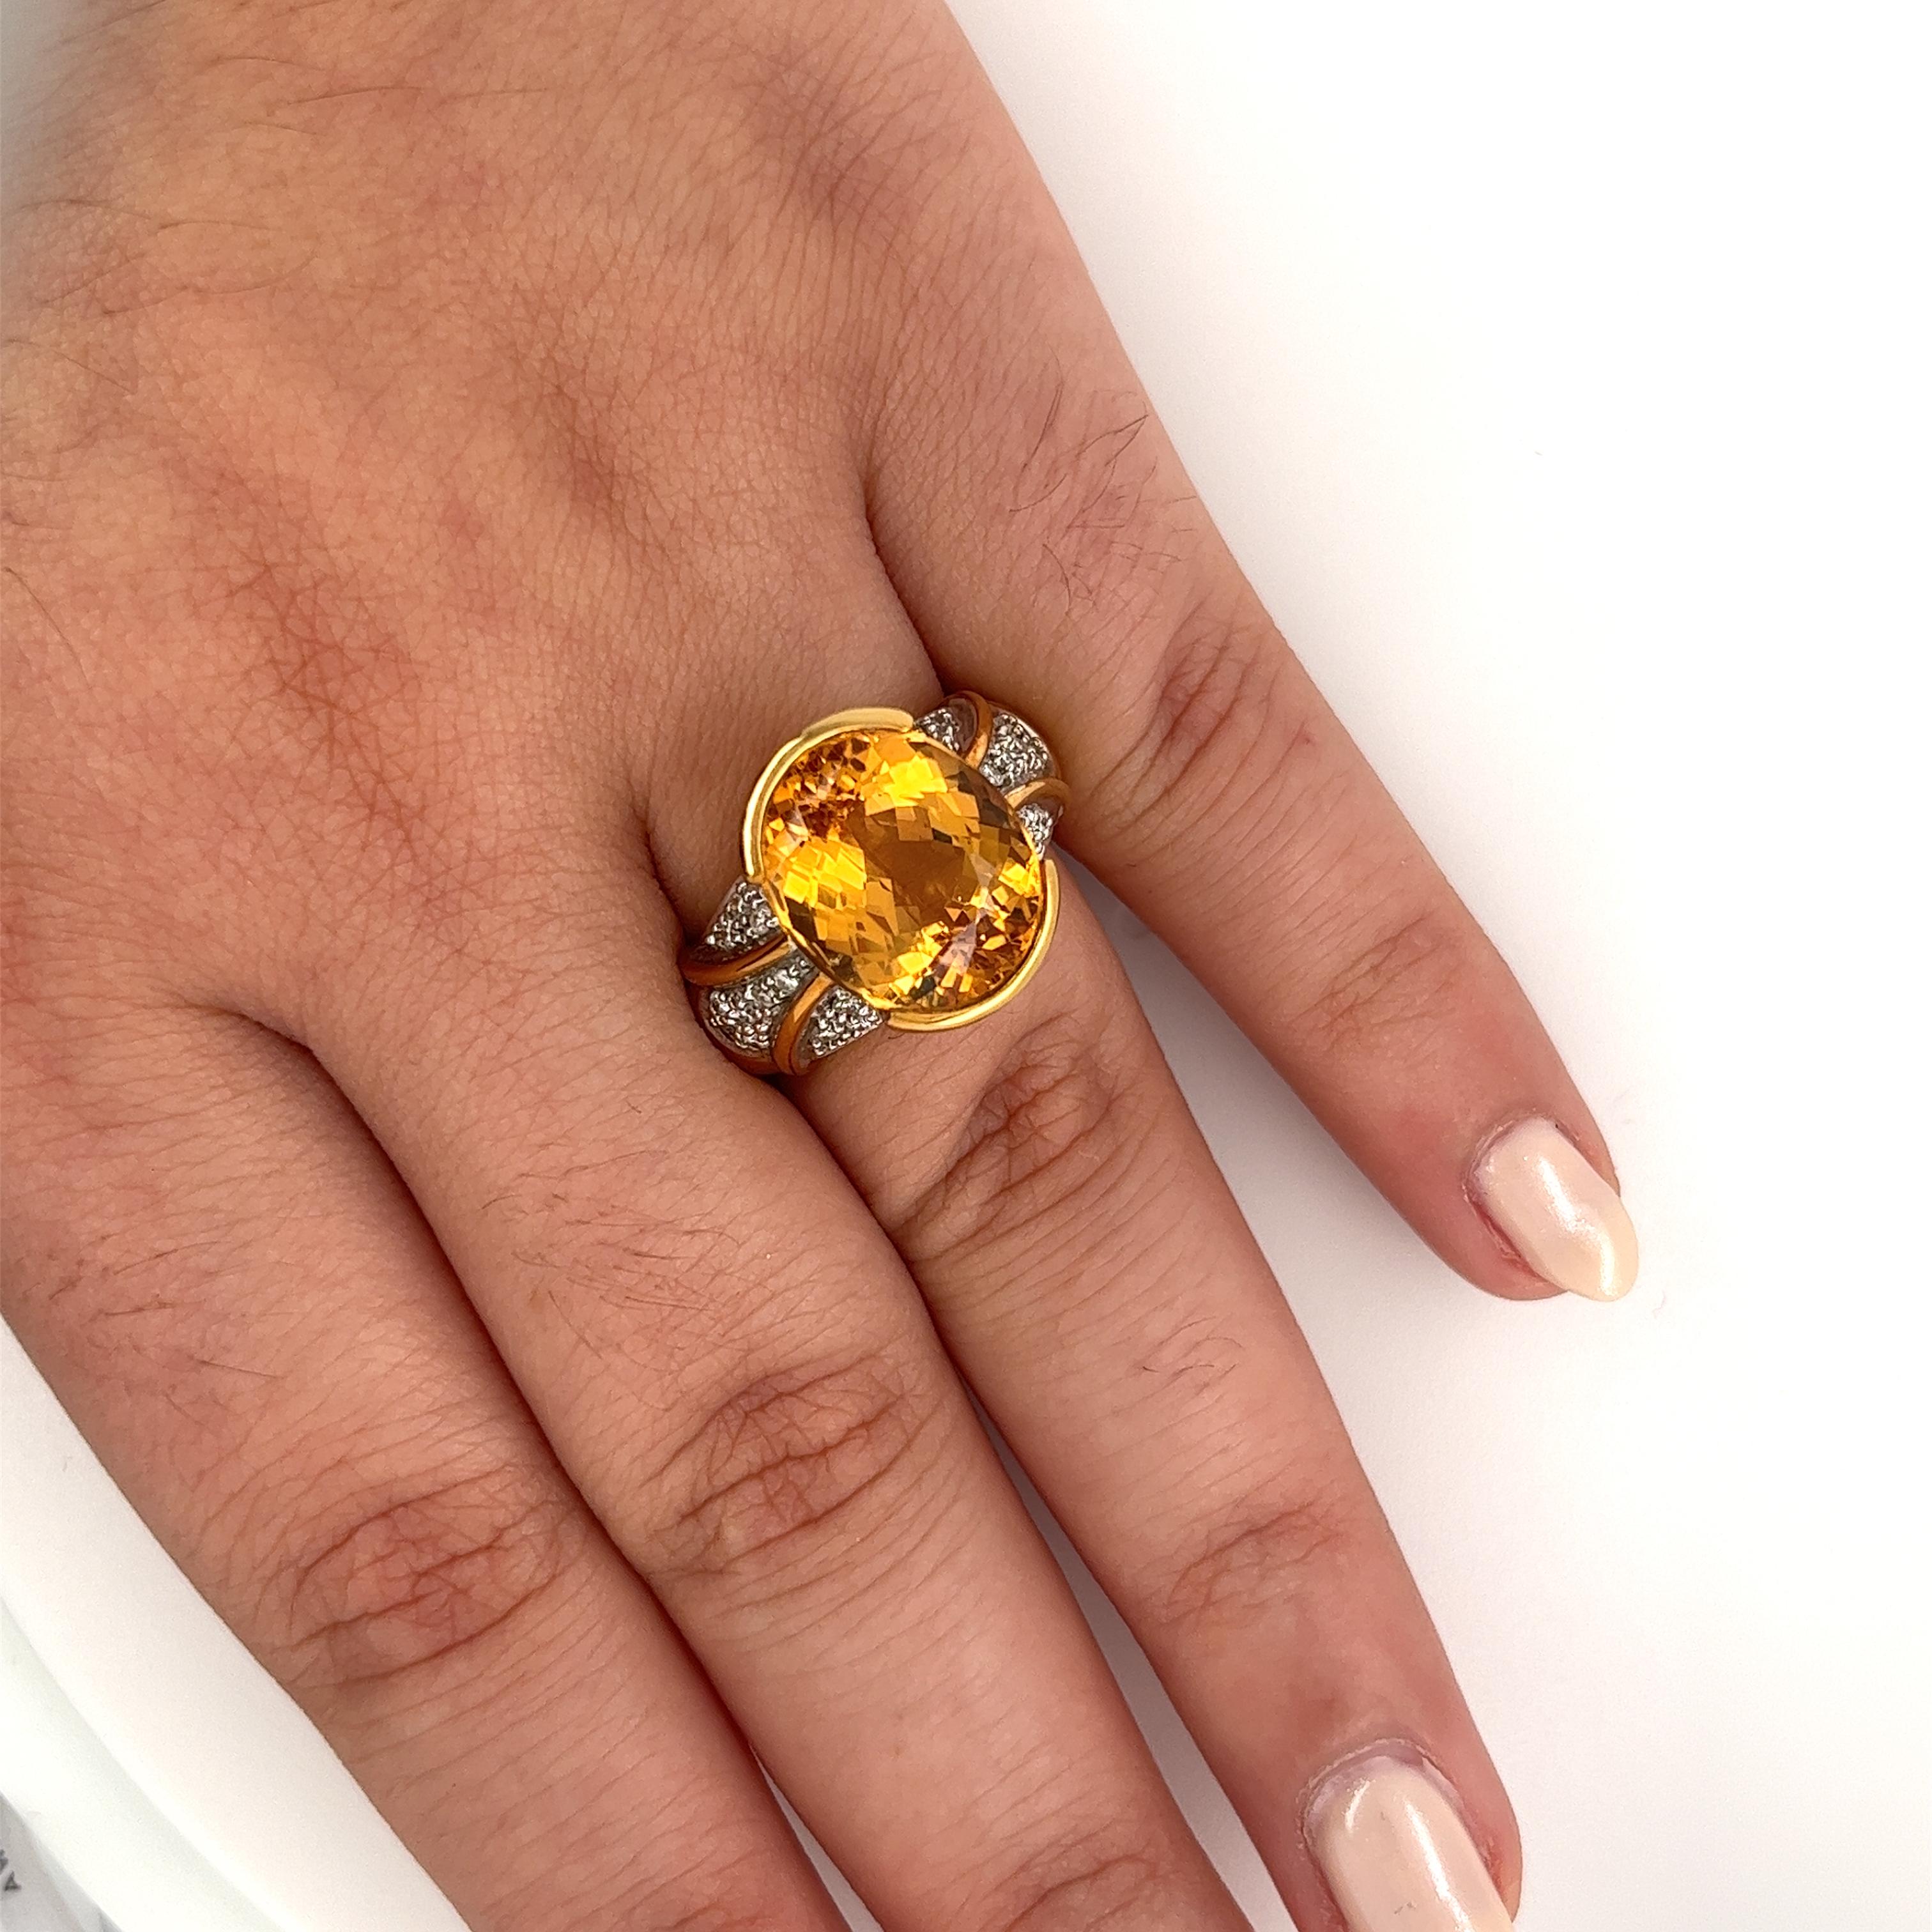 Women's Vintage 10.5 Carat Oval Cut Precious Topaz & Curved Diamond Ring in 18k Gold  For Sale